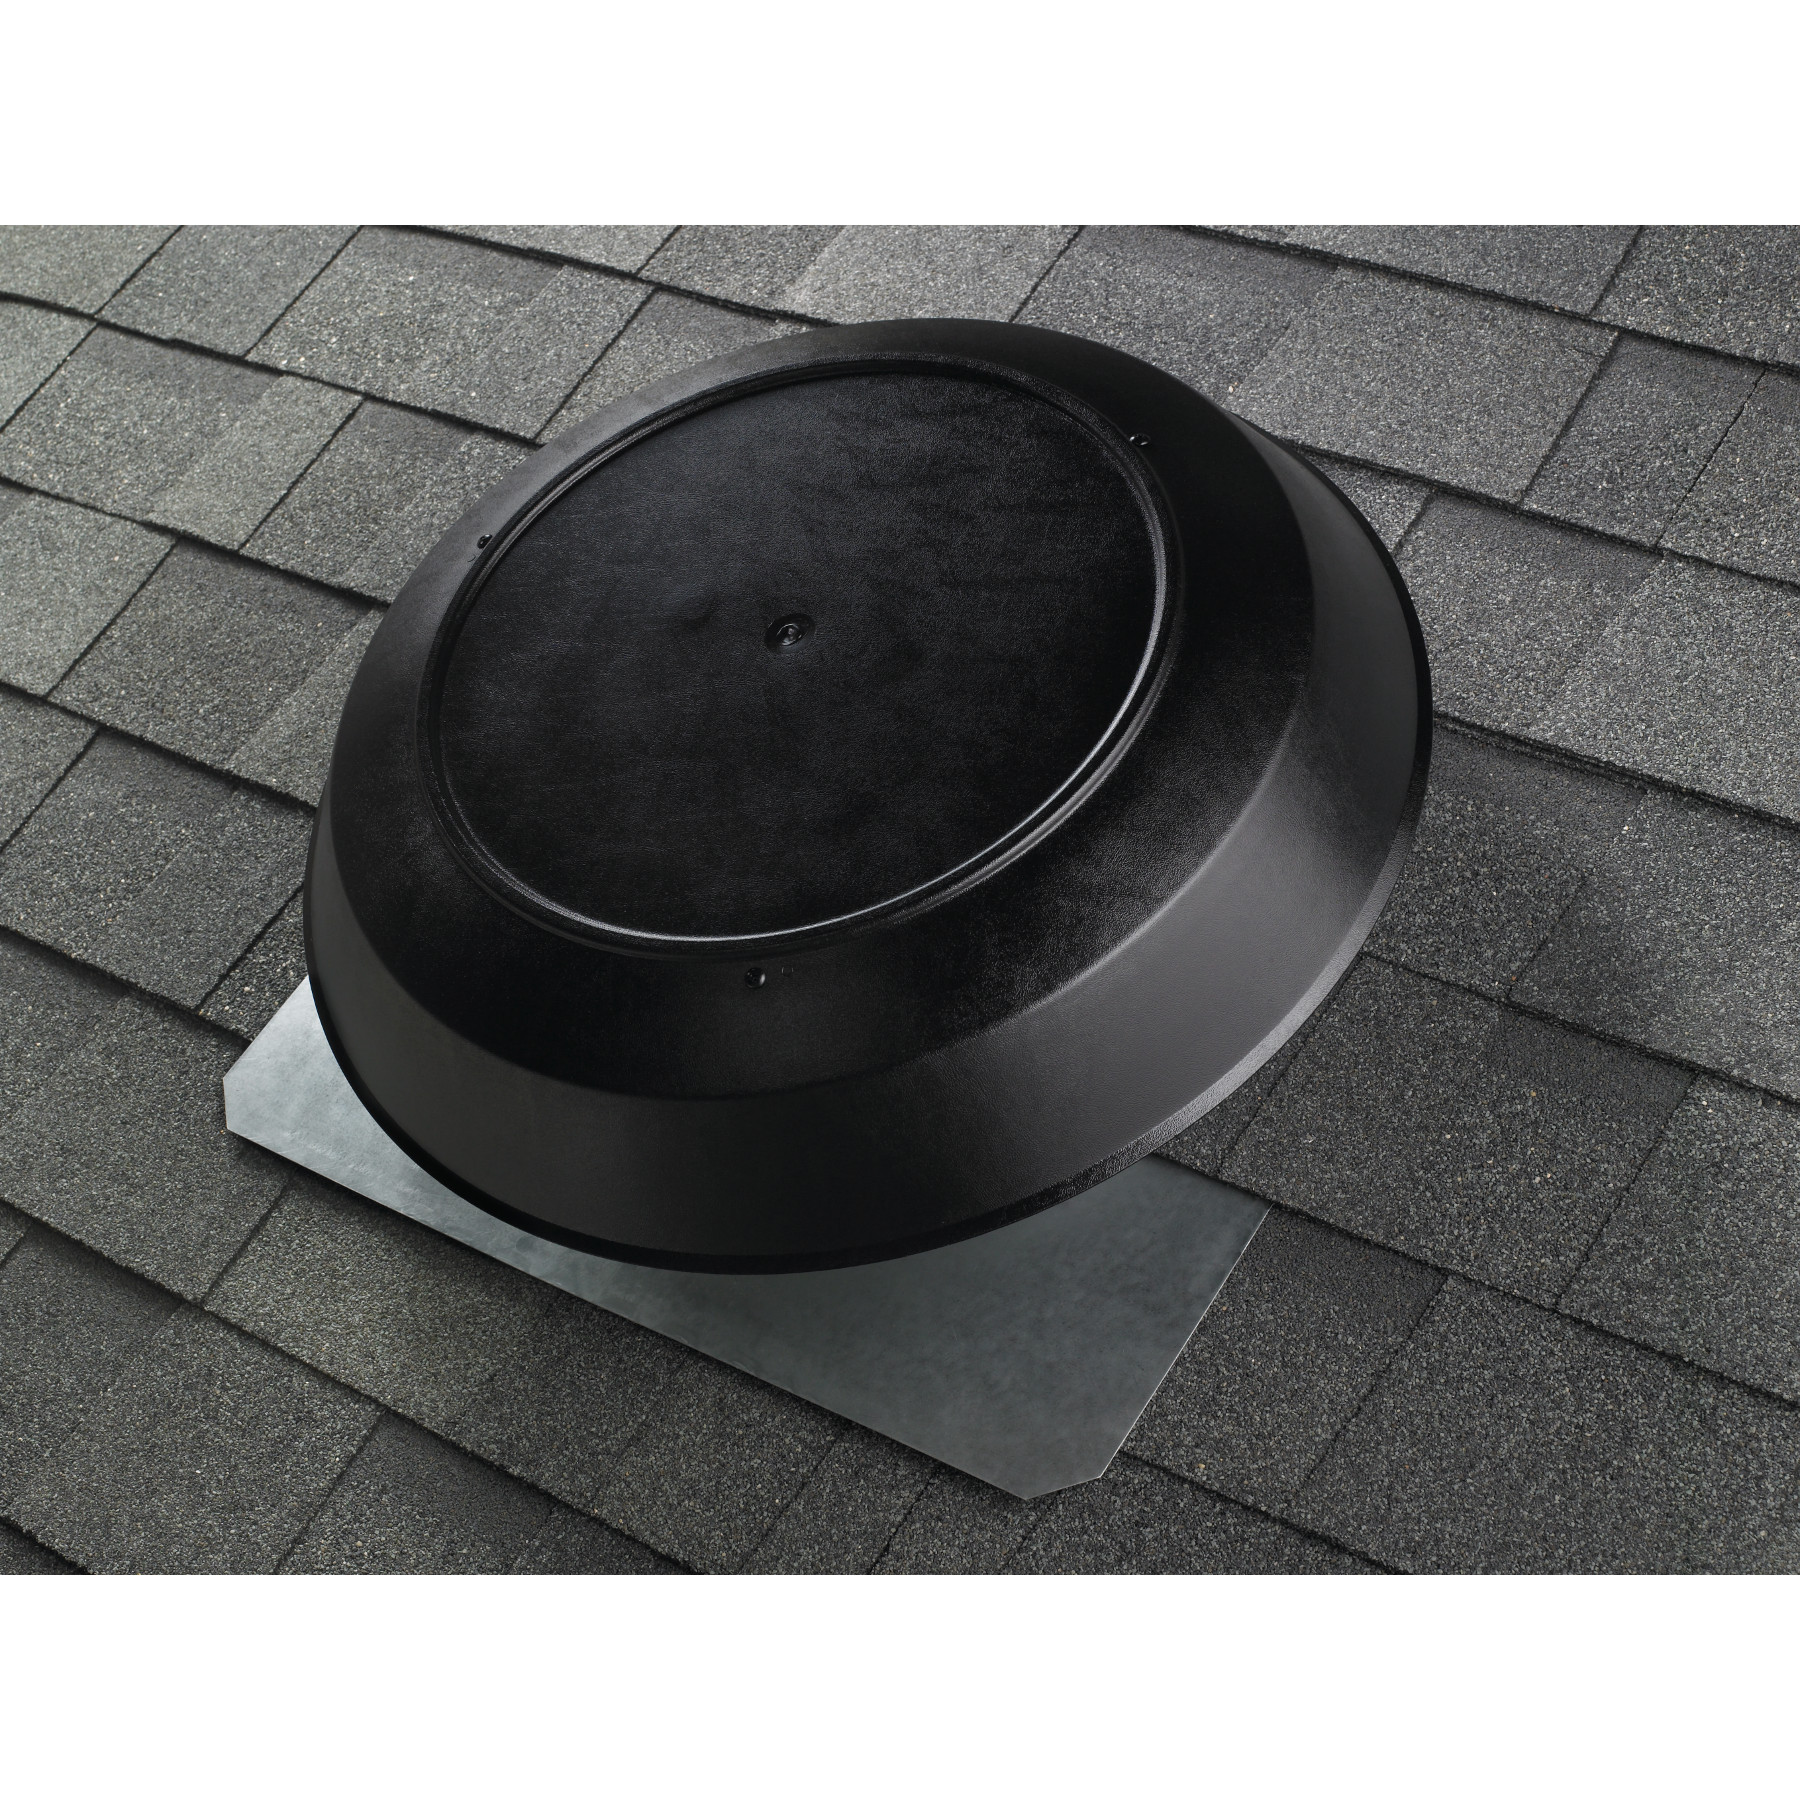 356BK Broan® 1600 CFM Powered Attic and Garage Ventilation Fan, Roof Mounted, Black Dome